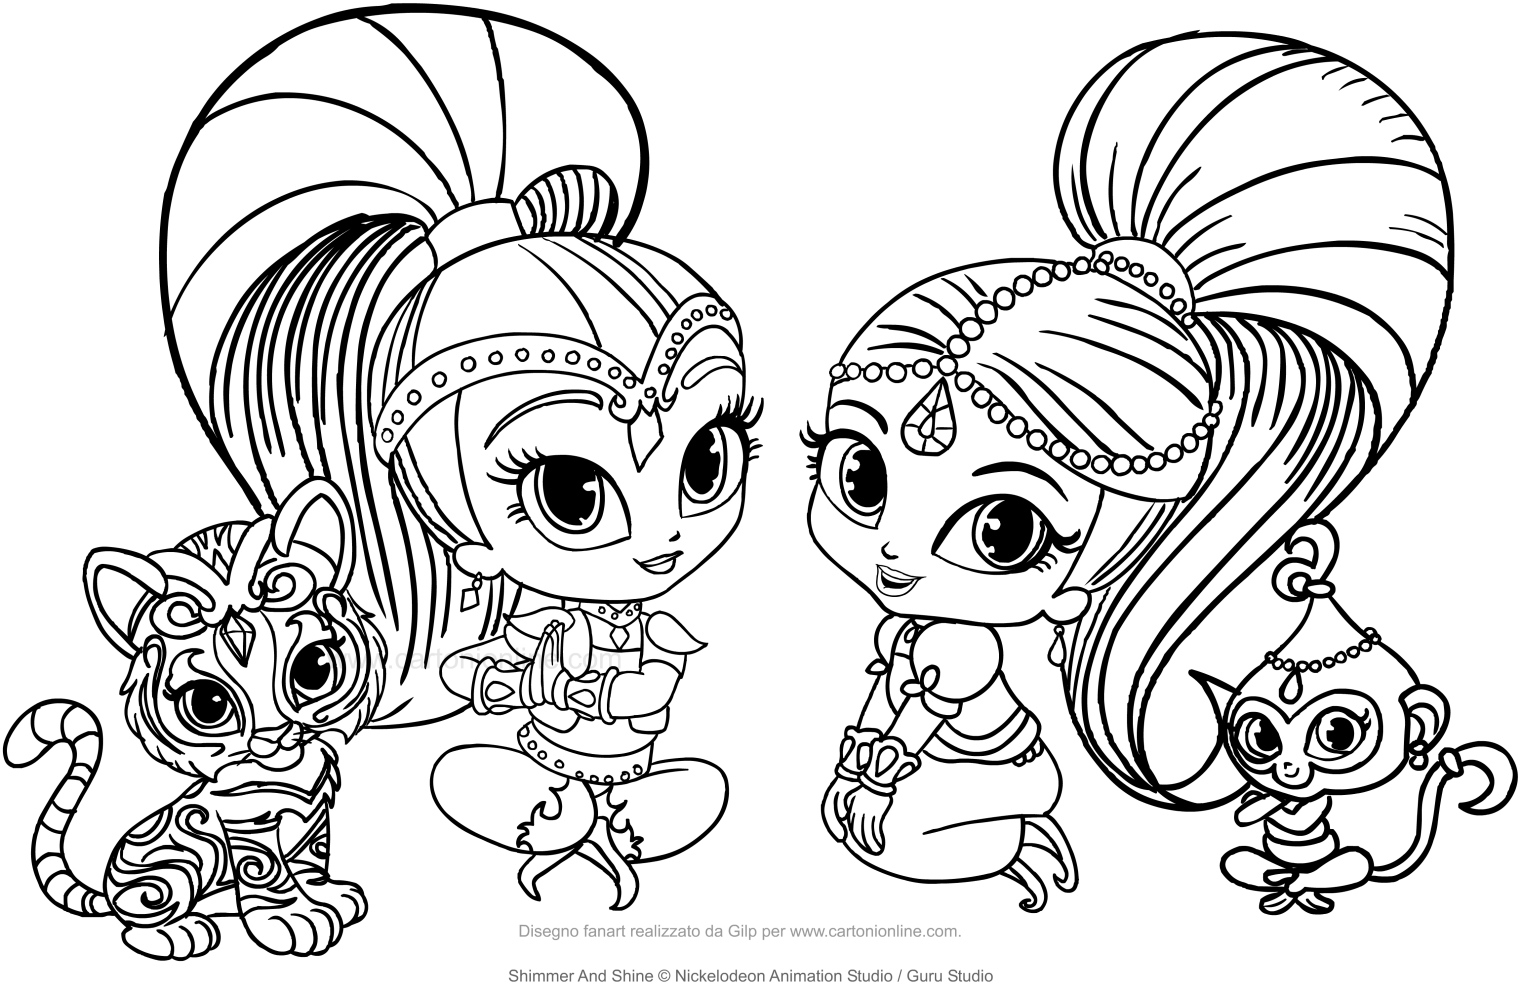 Shimmer And Shine Coloring Pages To Print Shimmer And Shine Coloring Page